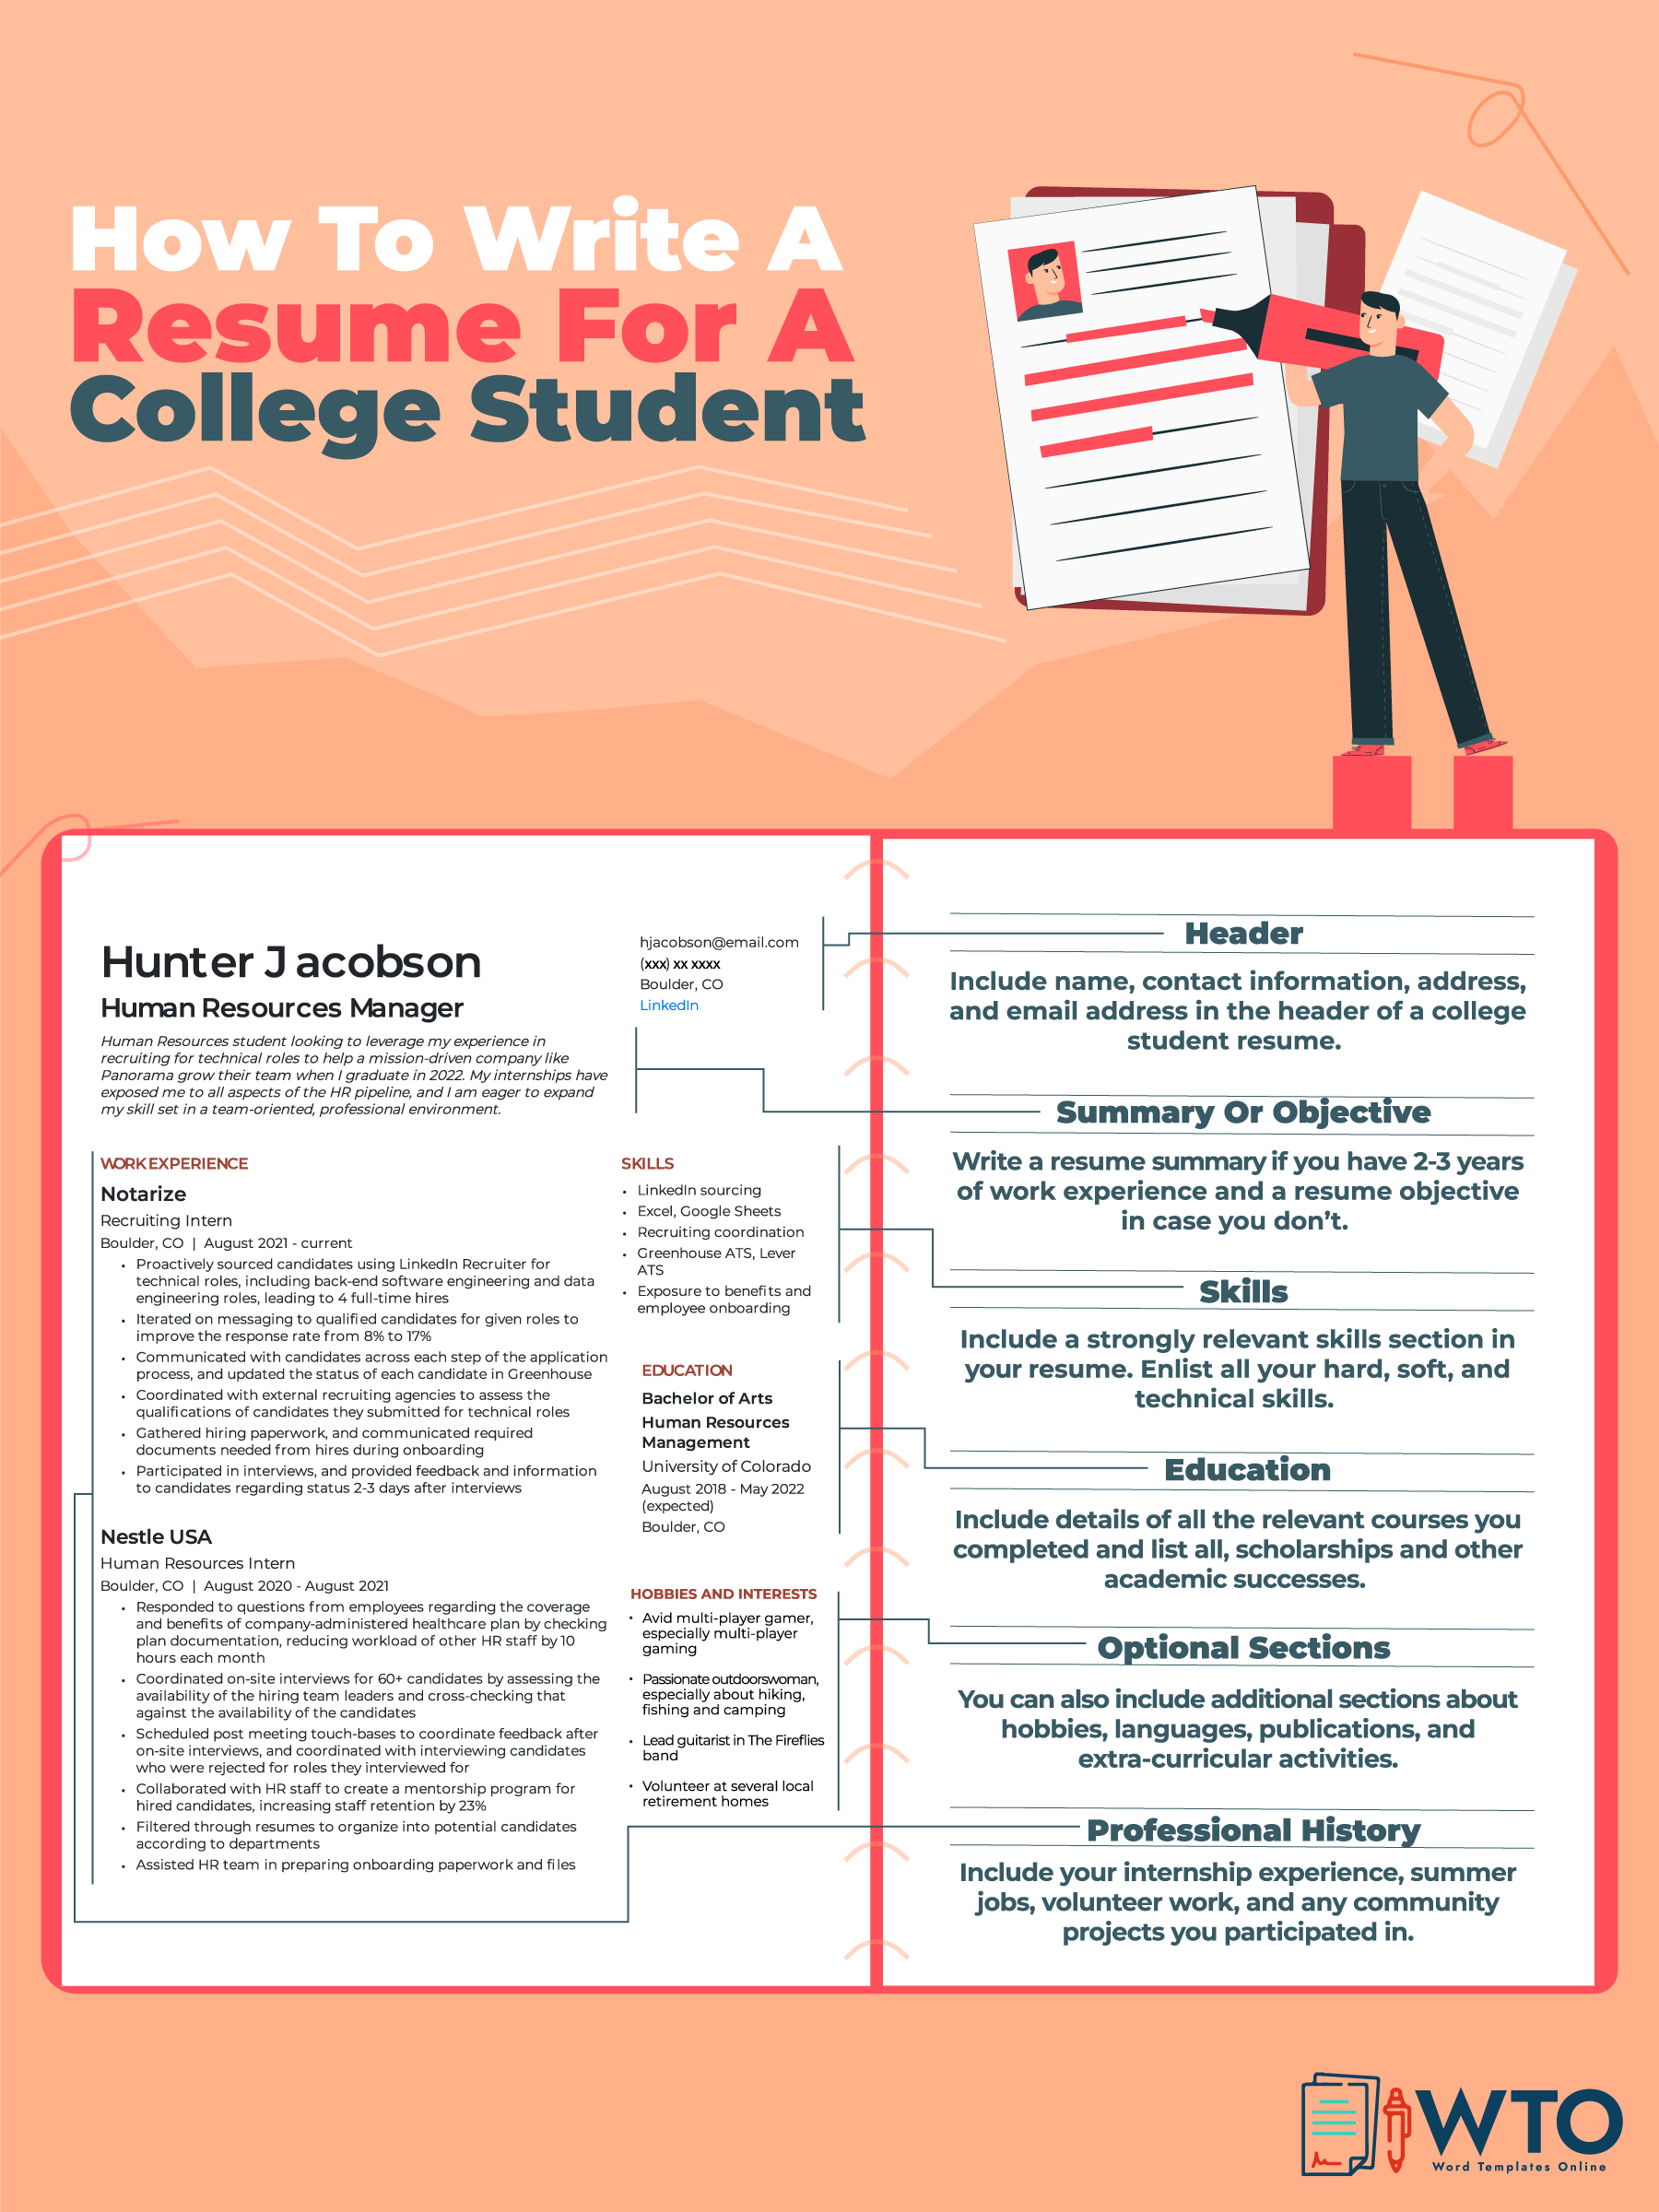 This infographic is about how to write a college student resume.